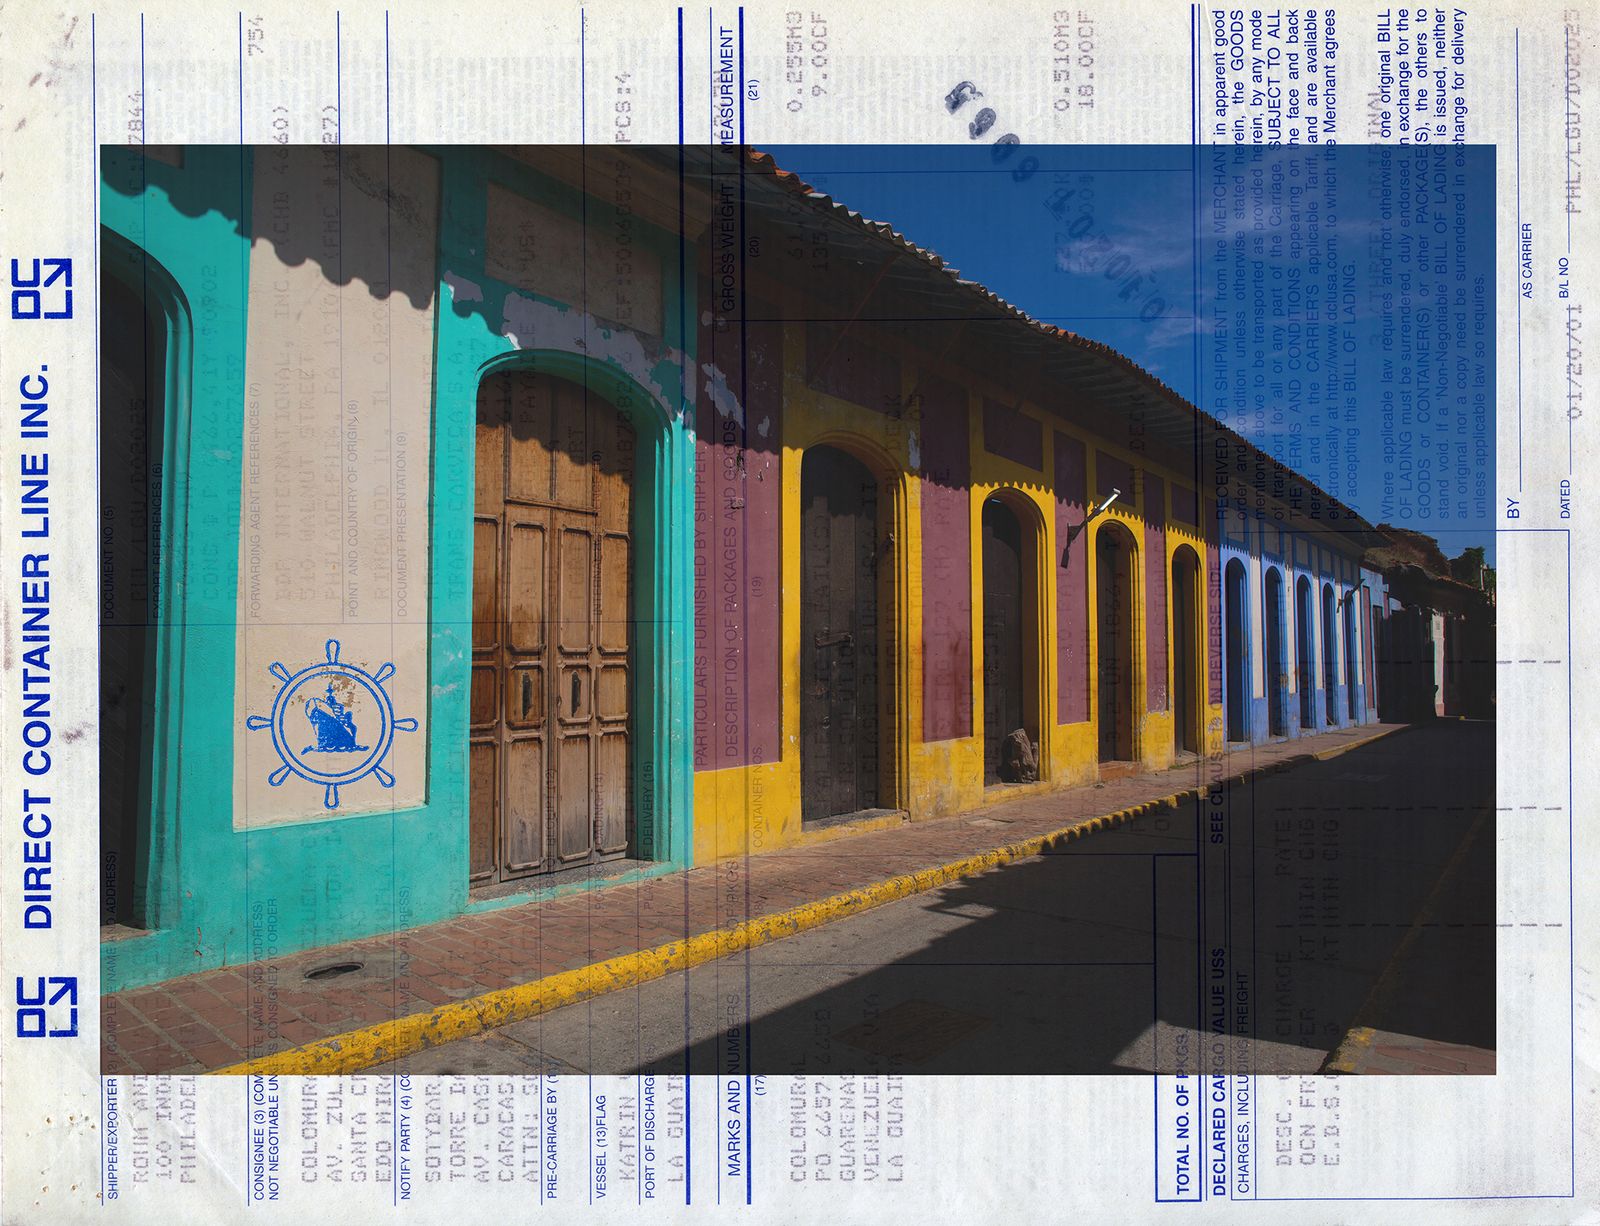 © Freisy González Portales - Image from the Behind that blue and red (Detrás de ese azul y rojo) photography project